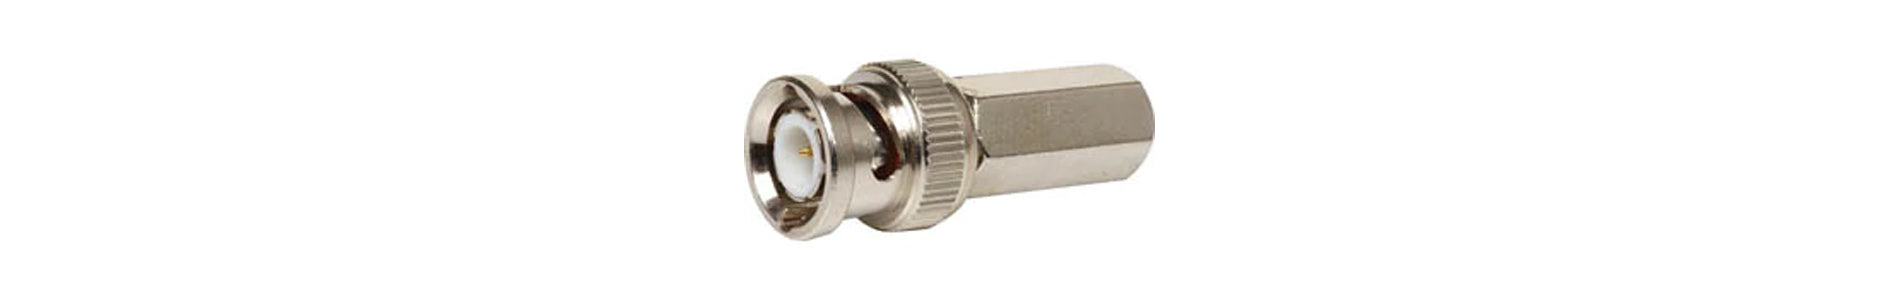 Coaxial Twist on Connectors